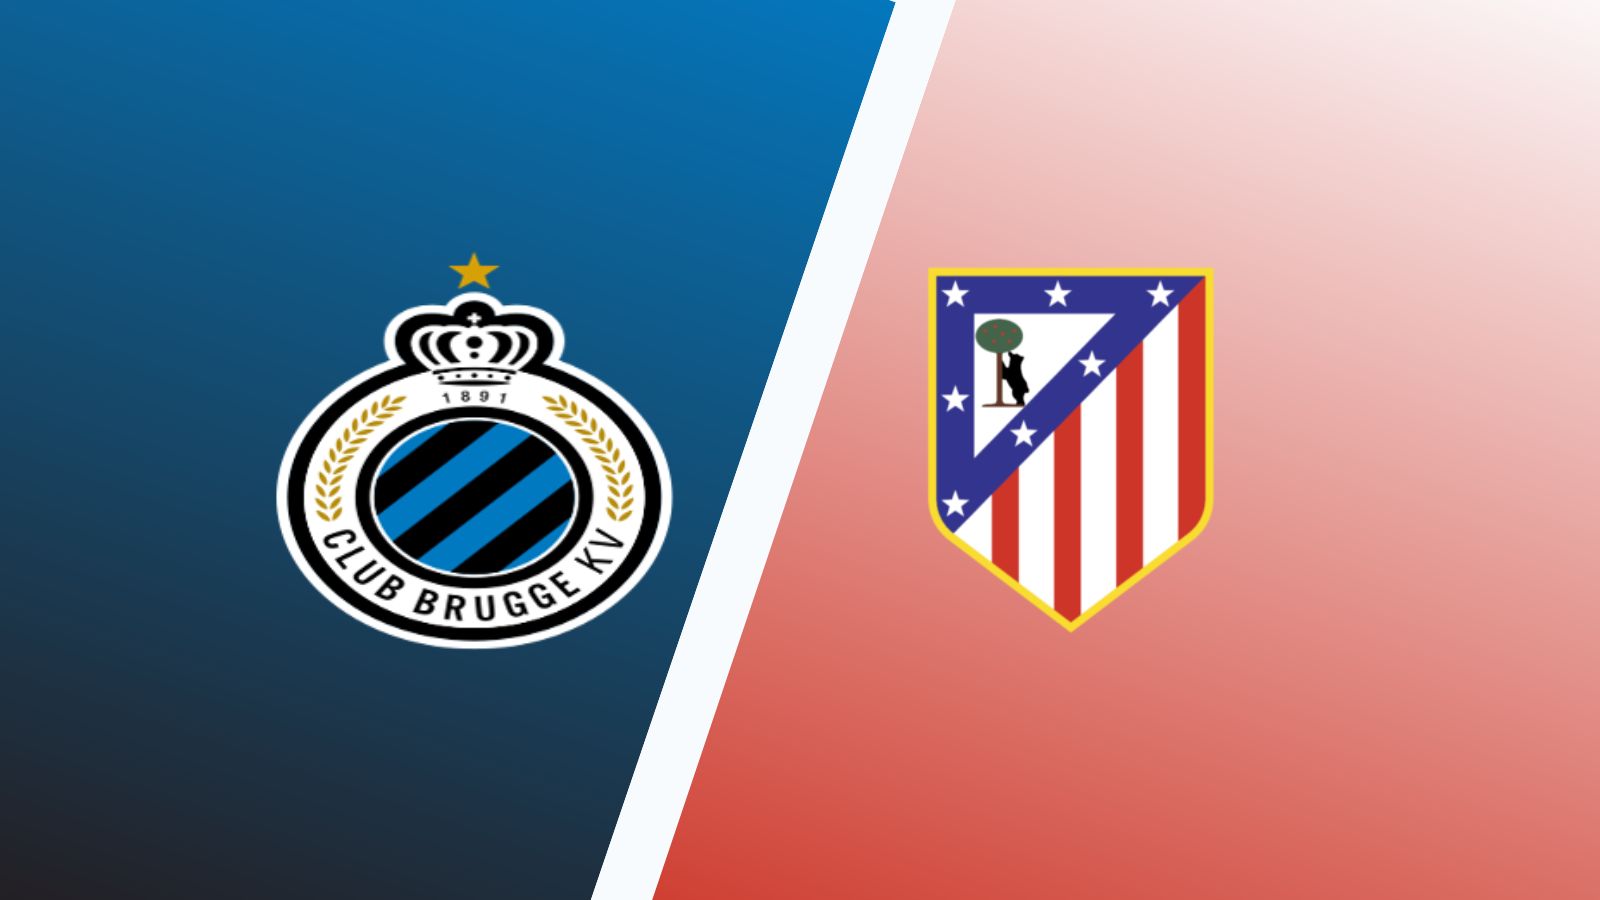 Club Brugge vs Atletico Madrid Predictions & Match Preview